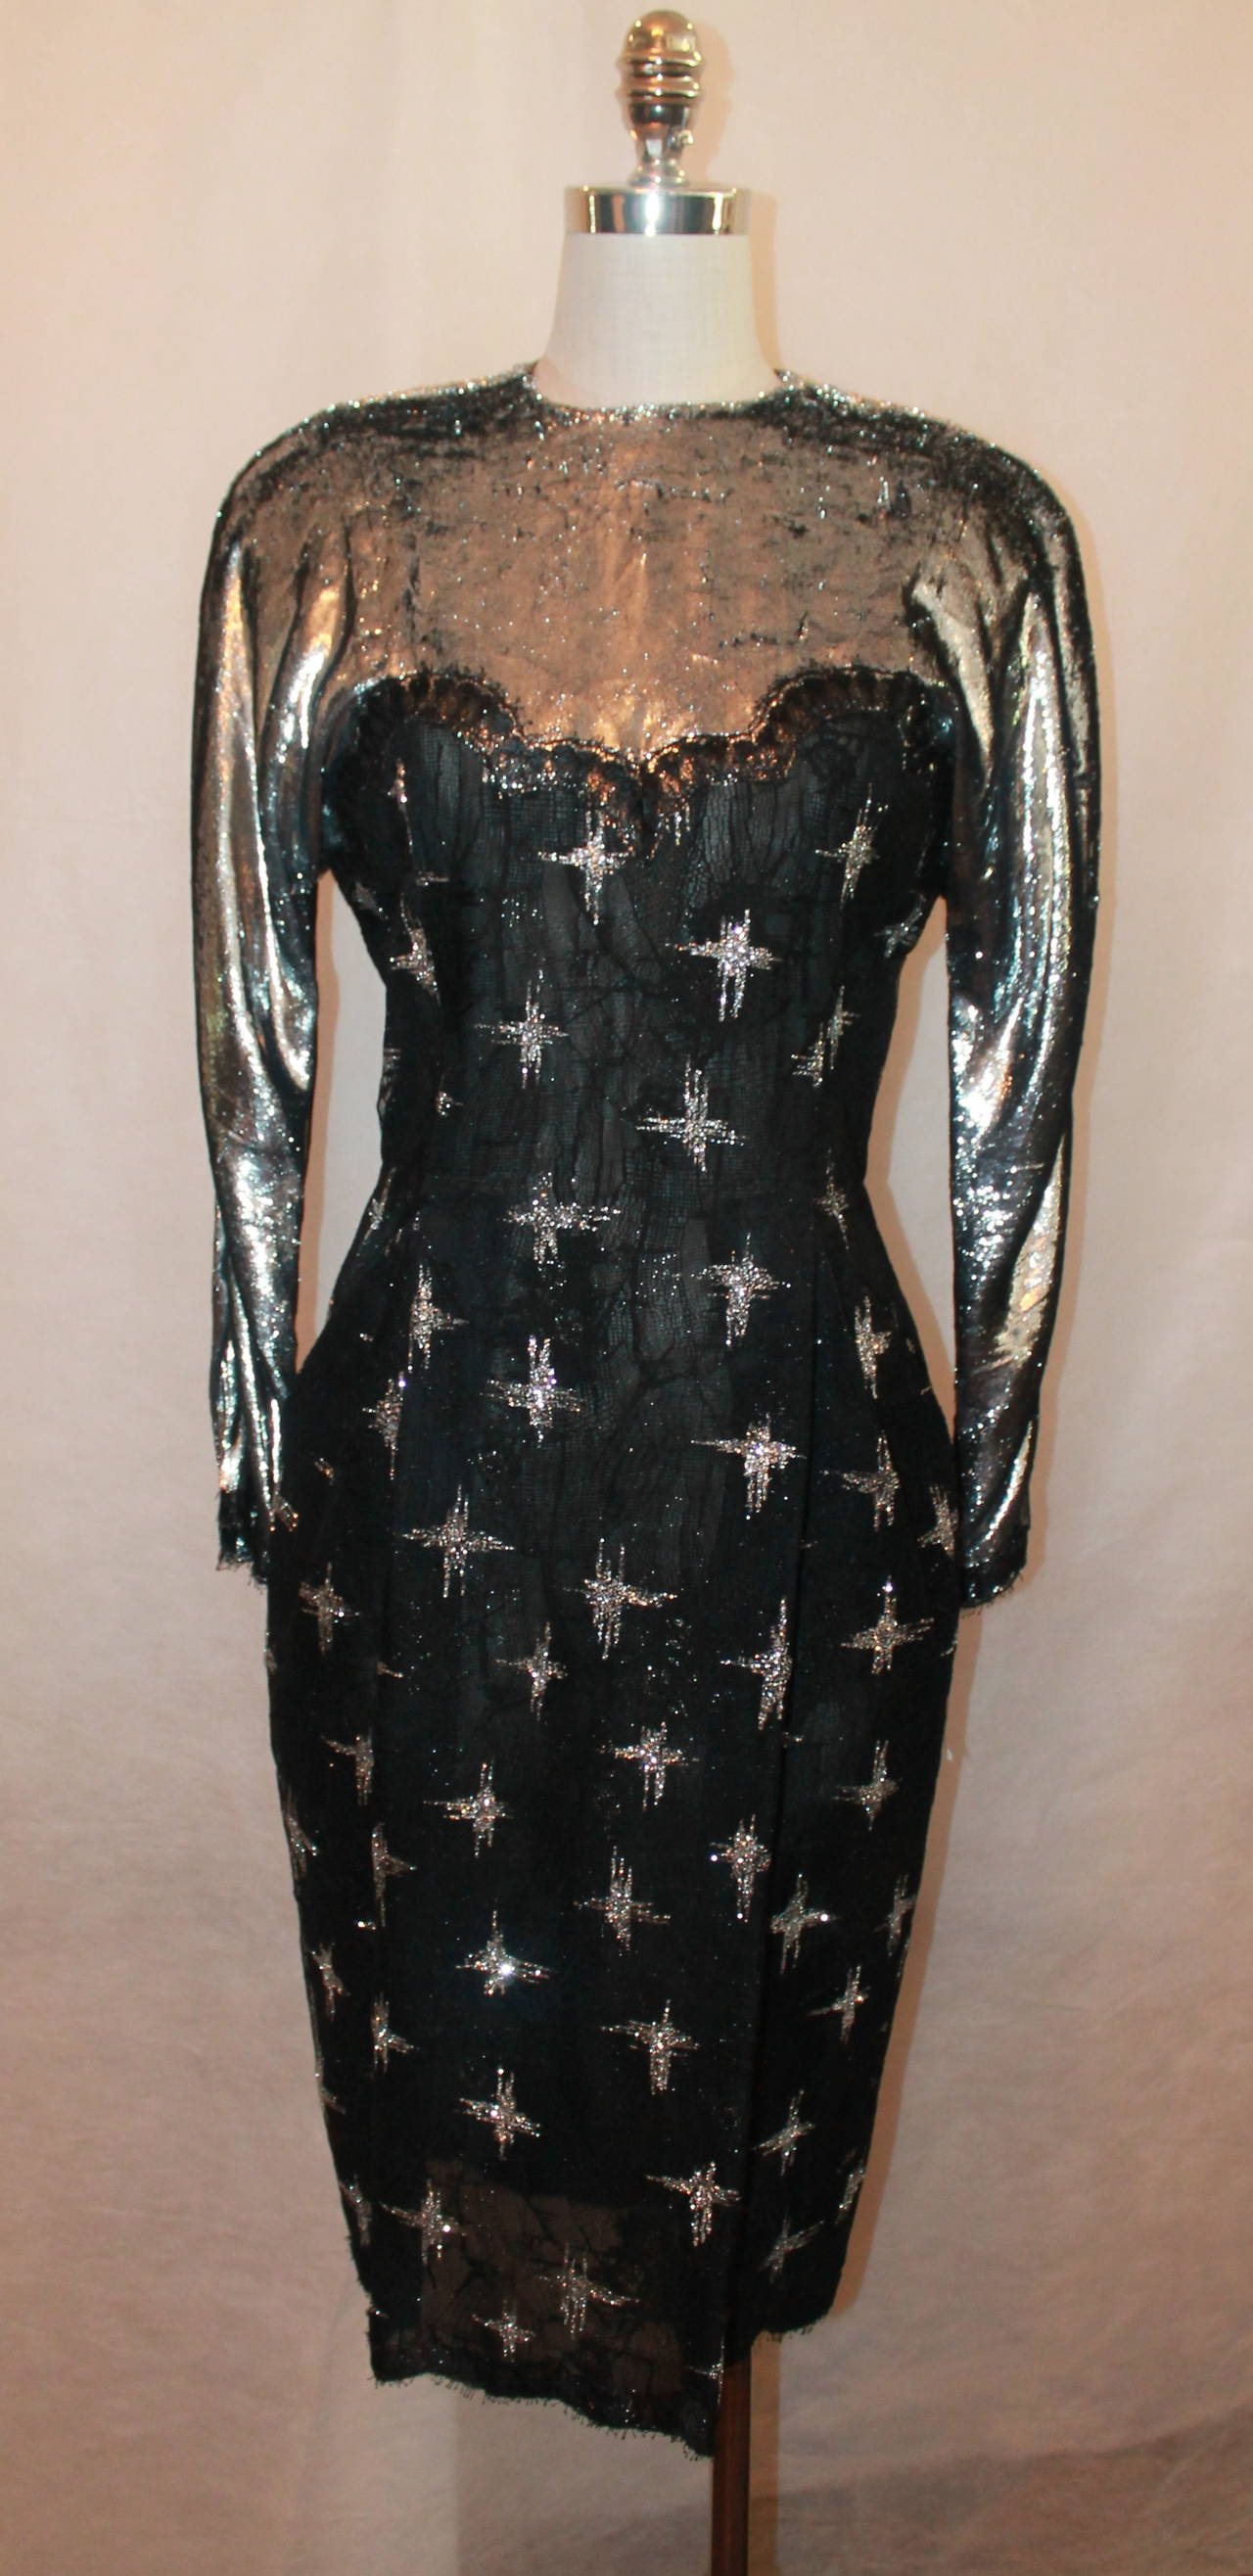 Geoffrey Beene 1980's Vintage Black & Silver Long Sleeve Dress - 8. This dress has a tinsel-like neckline, lace body with glitter star designs, and long sleeves. It is in very good vintage condition with minor pulls. 

Measurements:
Bust-